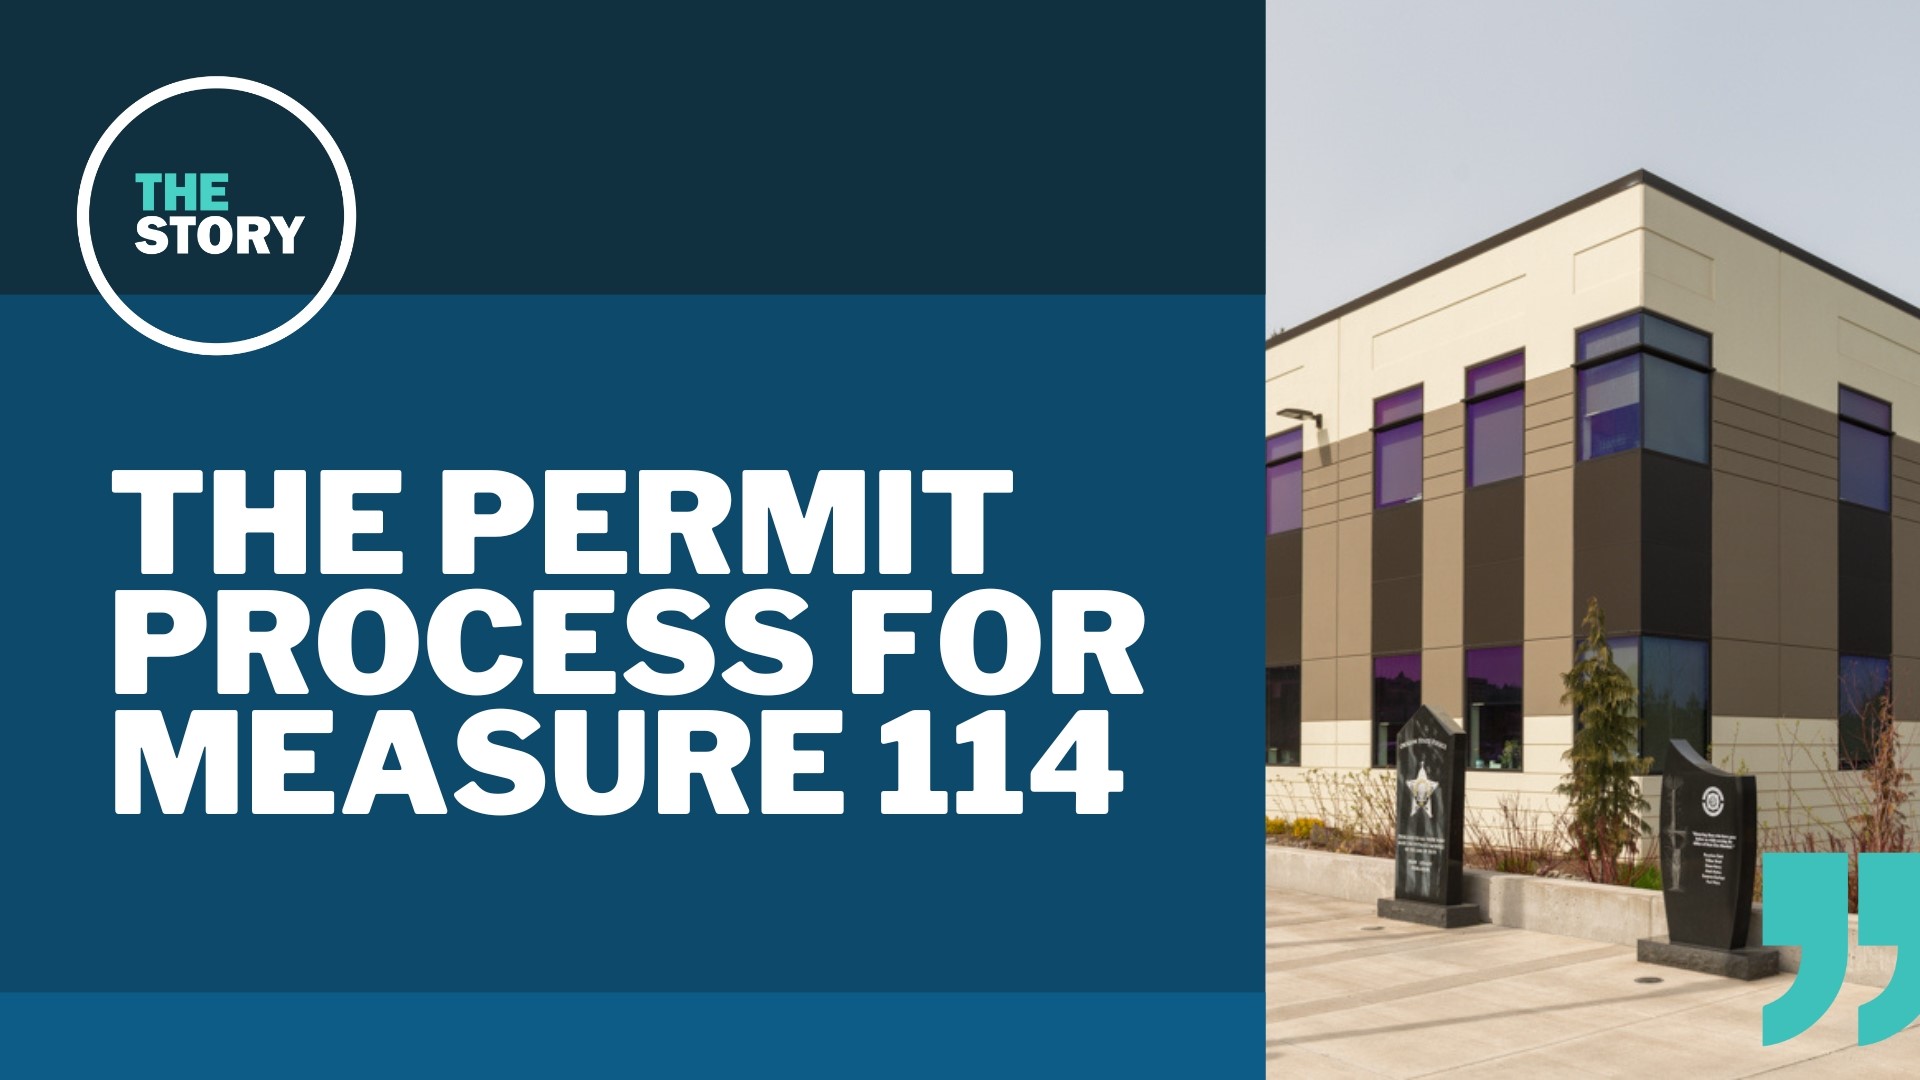 Though Measure 114 is currently blocked, law enforcement agencies have needed to be ready to take applications when and if it goes into effect.